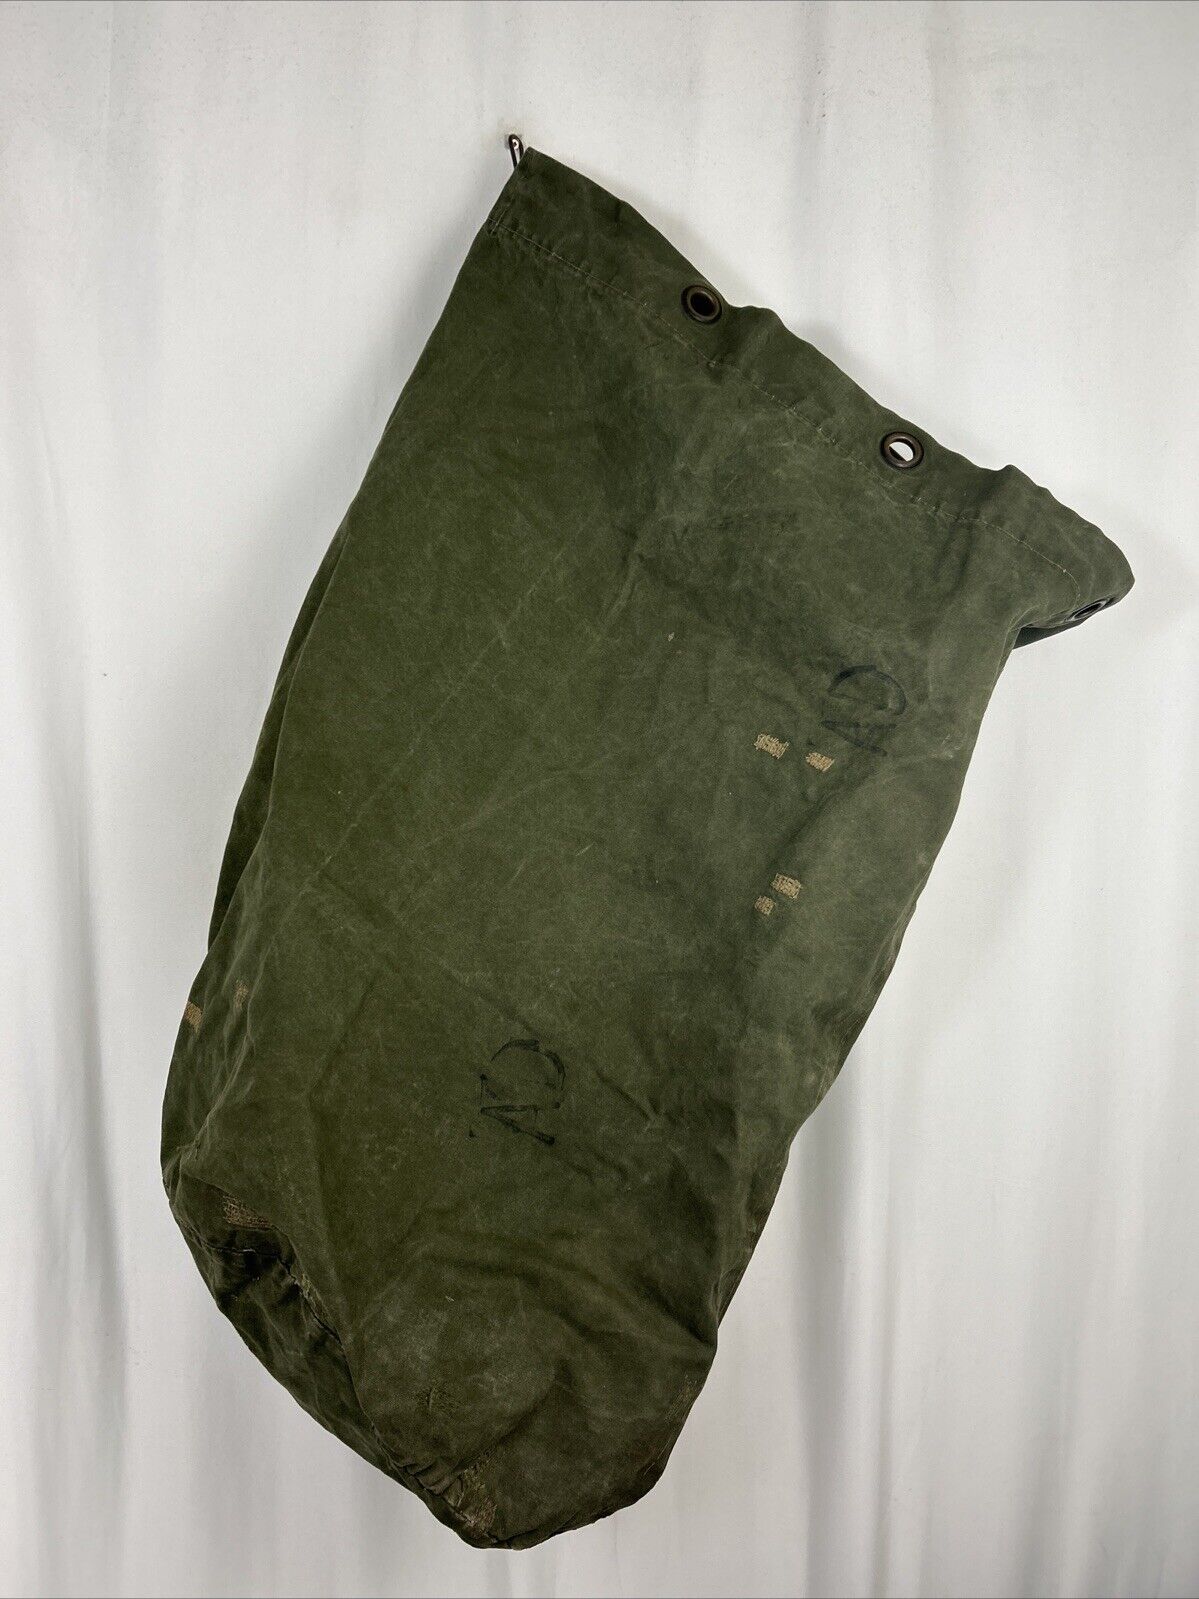 Vintage Army Green Canvas Duffle Bag Distressed Patchwork Cotton 34x16x16